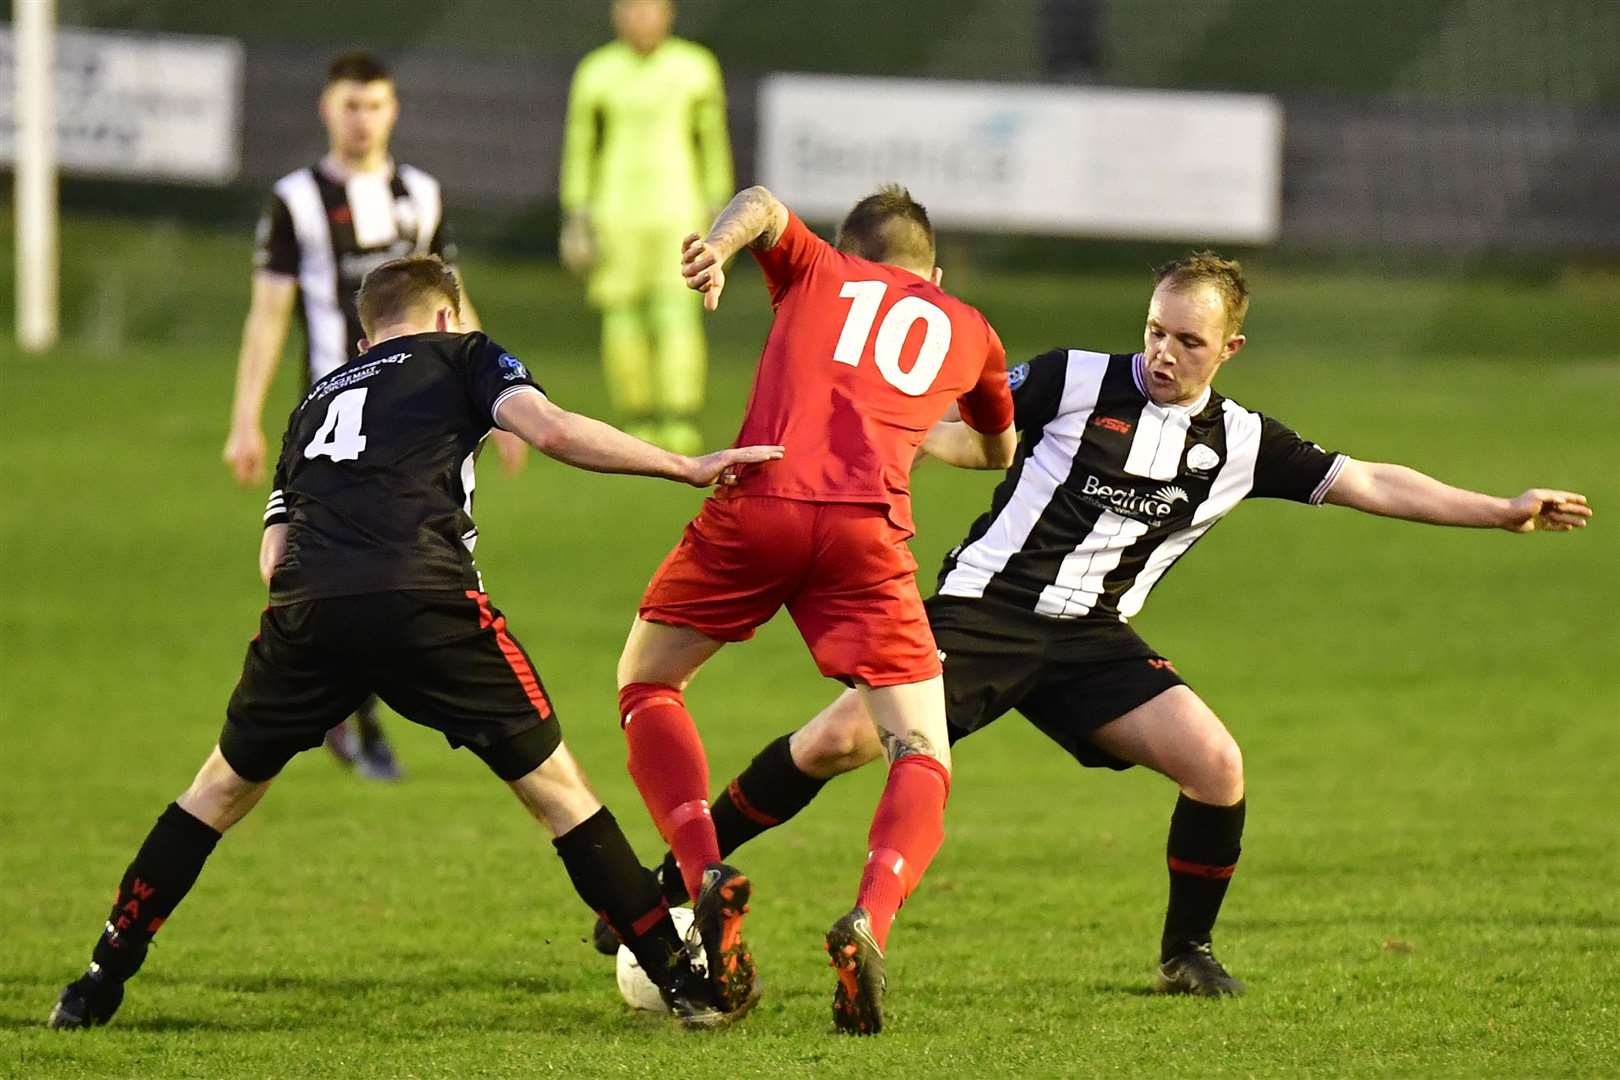 Alan Farquhar and Richard Macadie combine to stop Brora's Kyle Macleod. Picture: Mel Roger